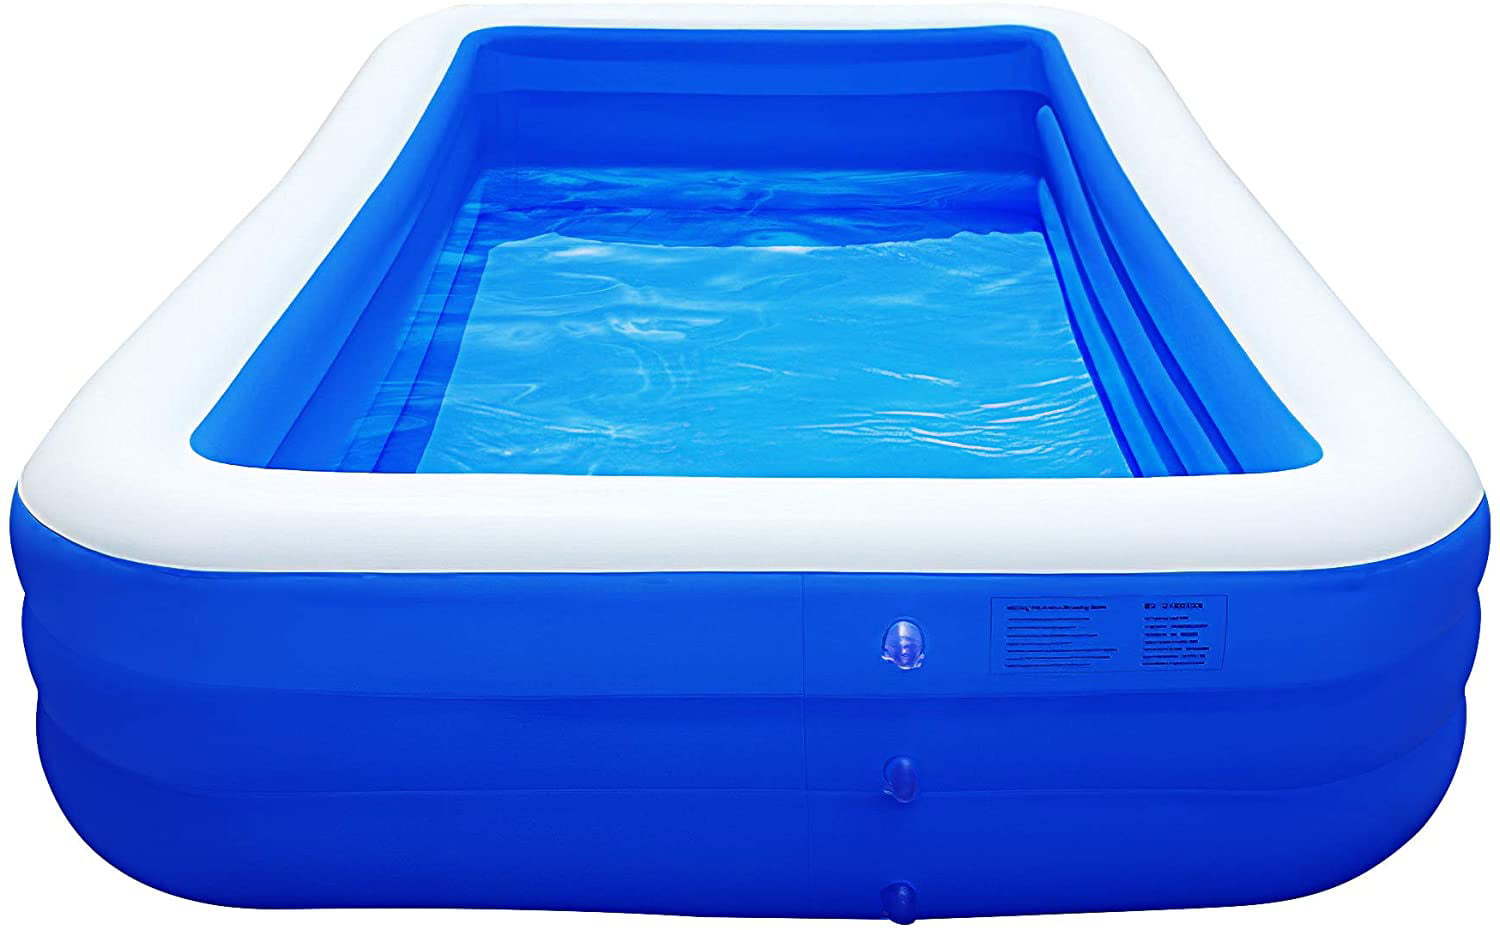 Inflatable Pool Kiddie Pool Blow Up Swimming Pool Inflatable Kid Pools Backyard Swim Center Family Pool 3 Layer 83x 59x 22 for Kids Navy Blue, 83x 59x 22 Garden Adults Toddlers Outdoor